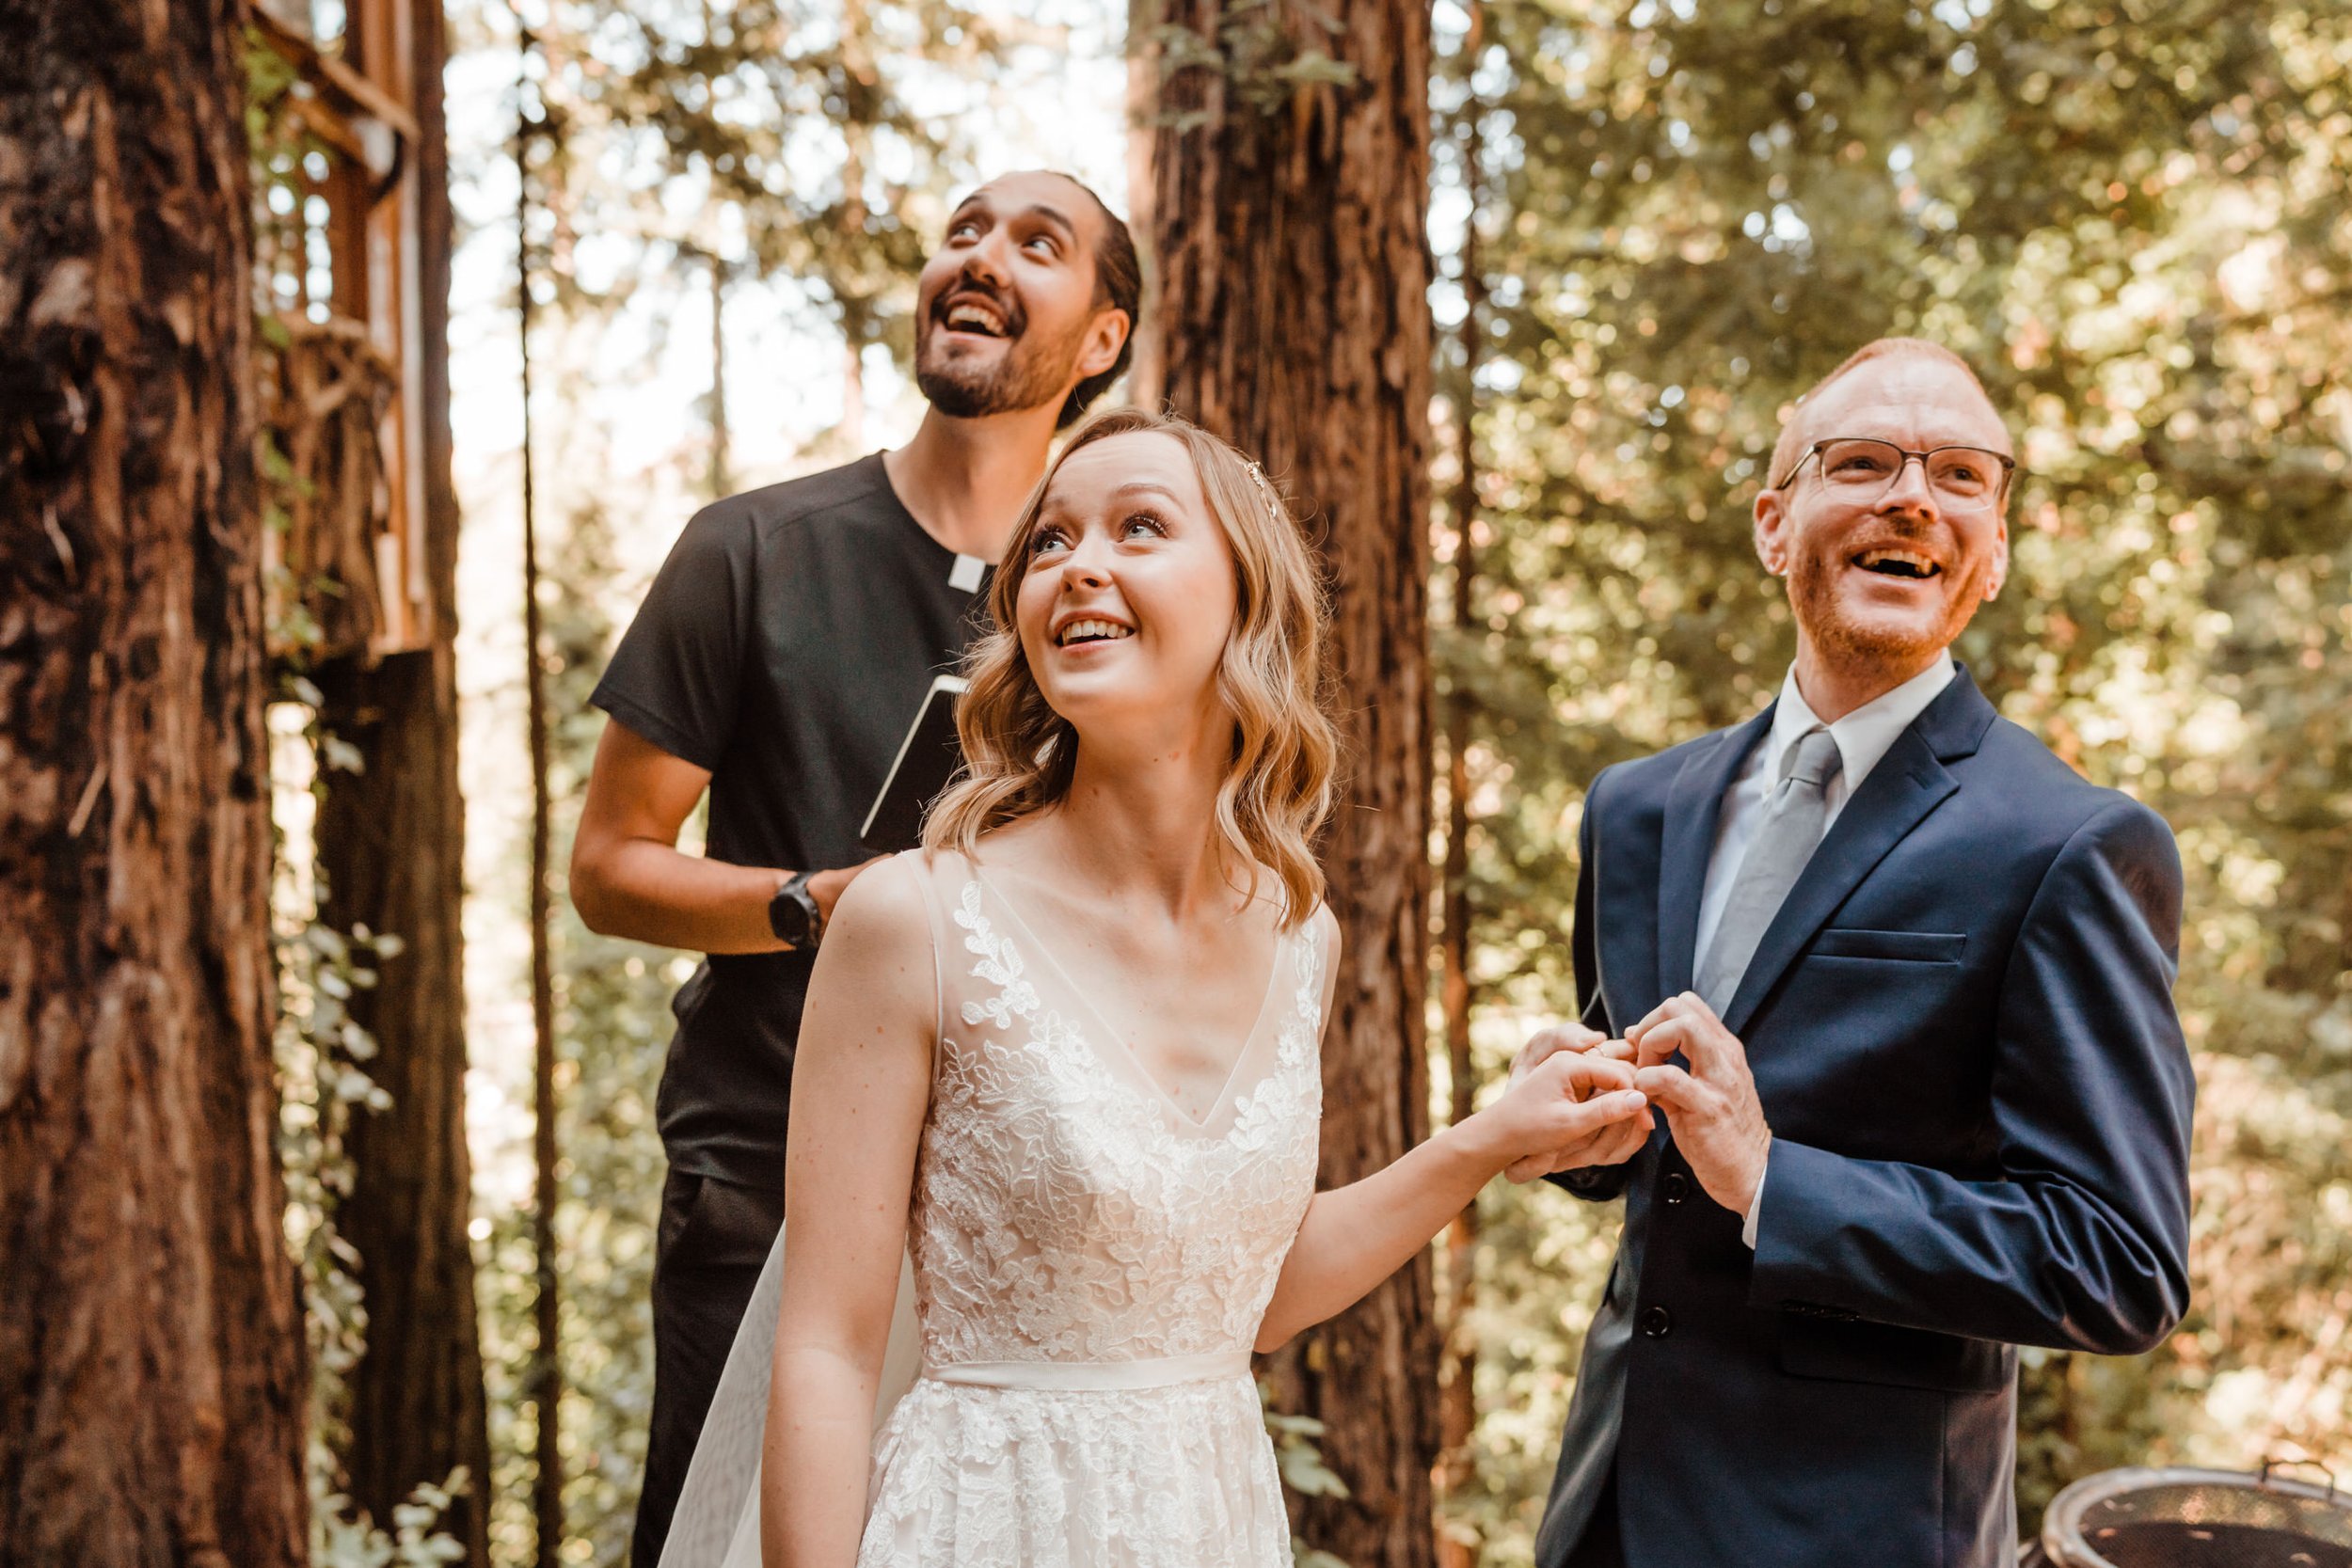 Wedding-in-the-Woods-Elopement-Ceremony-at-Airbnb-Outdoors (7).jpg